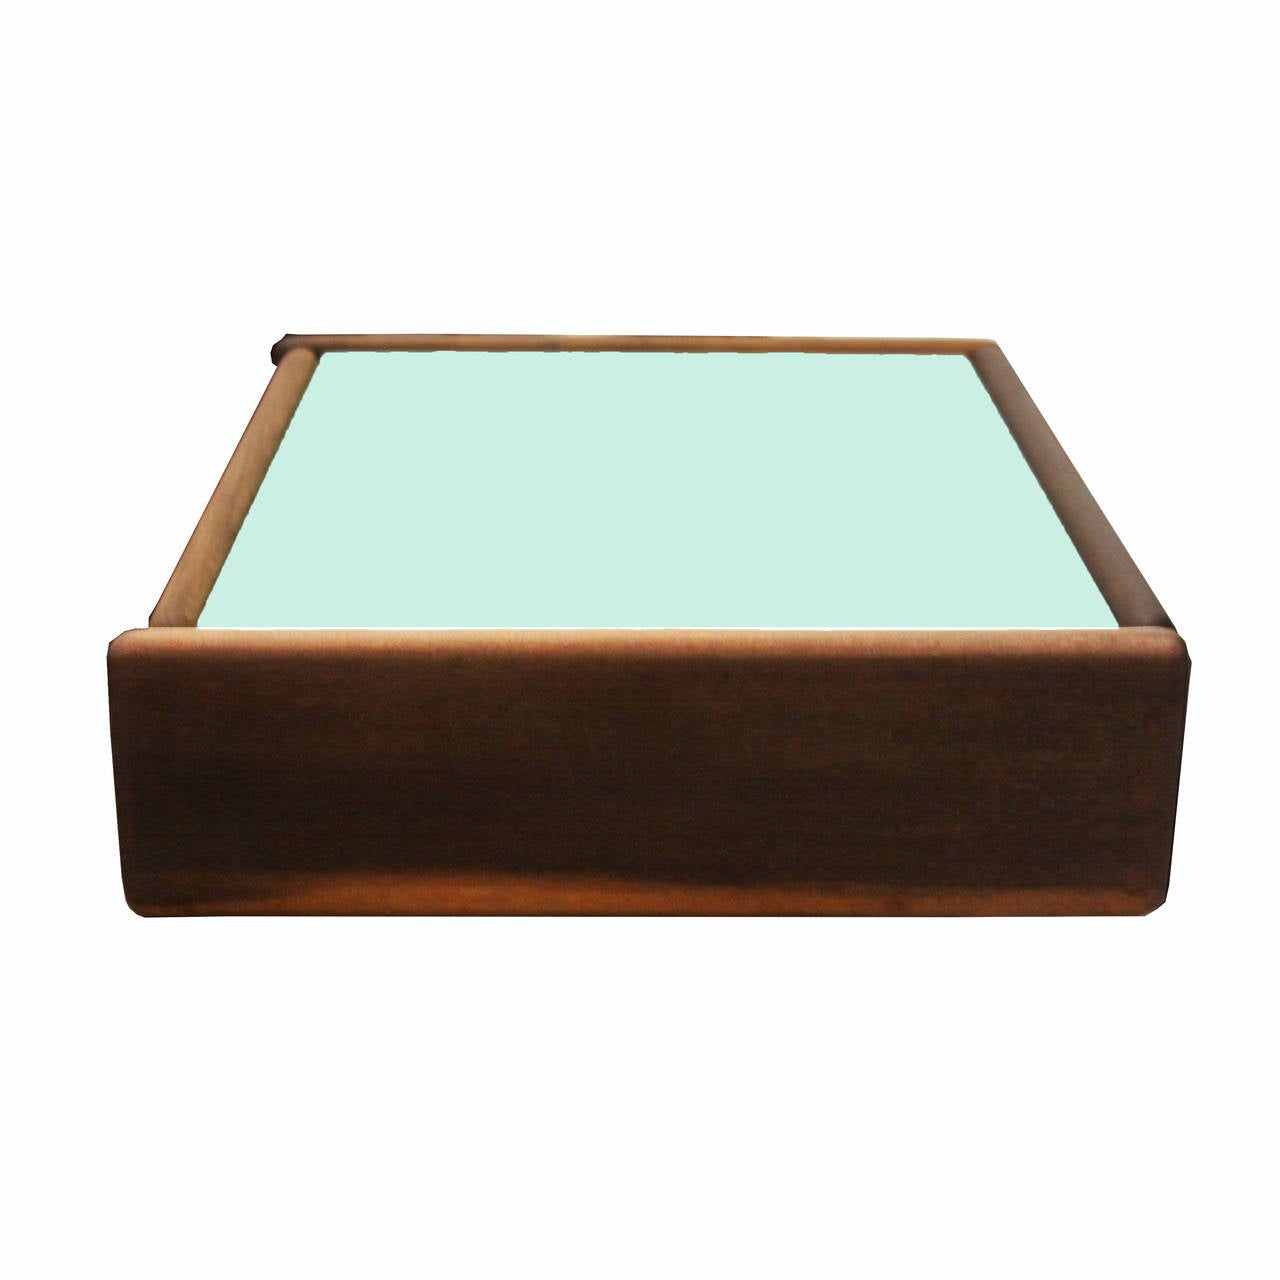 A floating shelf in Brazilian hardwood with single drawer and inset reverse painted white glass designed that appears almost light green through the glass, designed by Celina Moveis. The wood has been refinished with a clear oil finish that brings